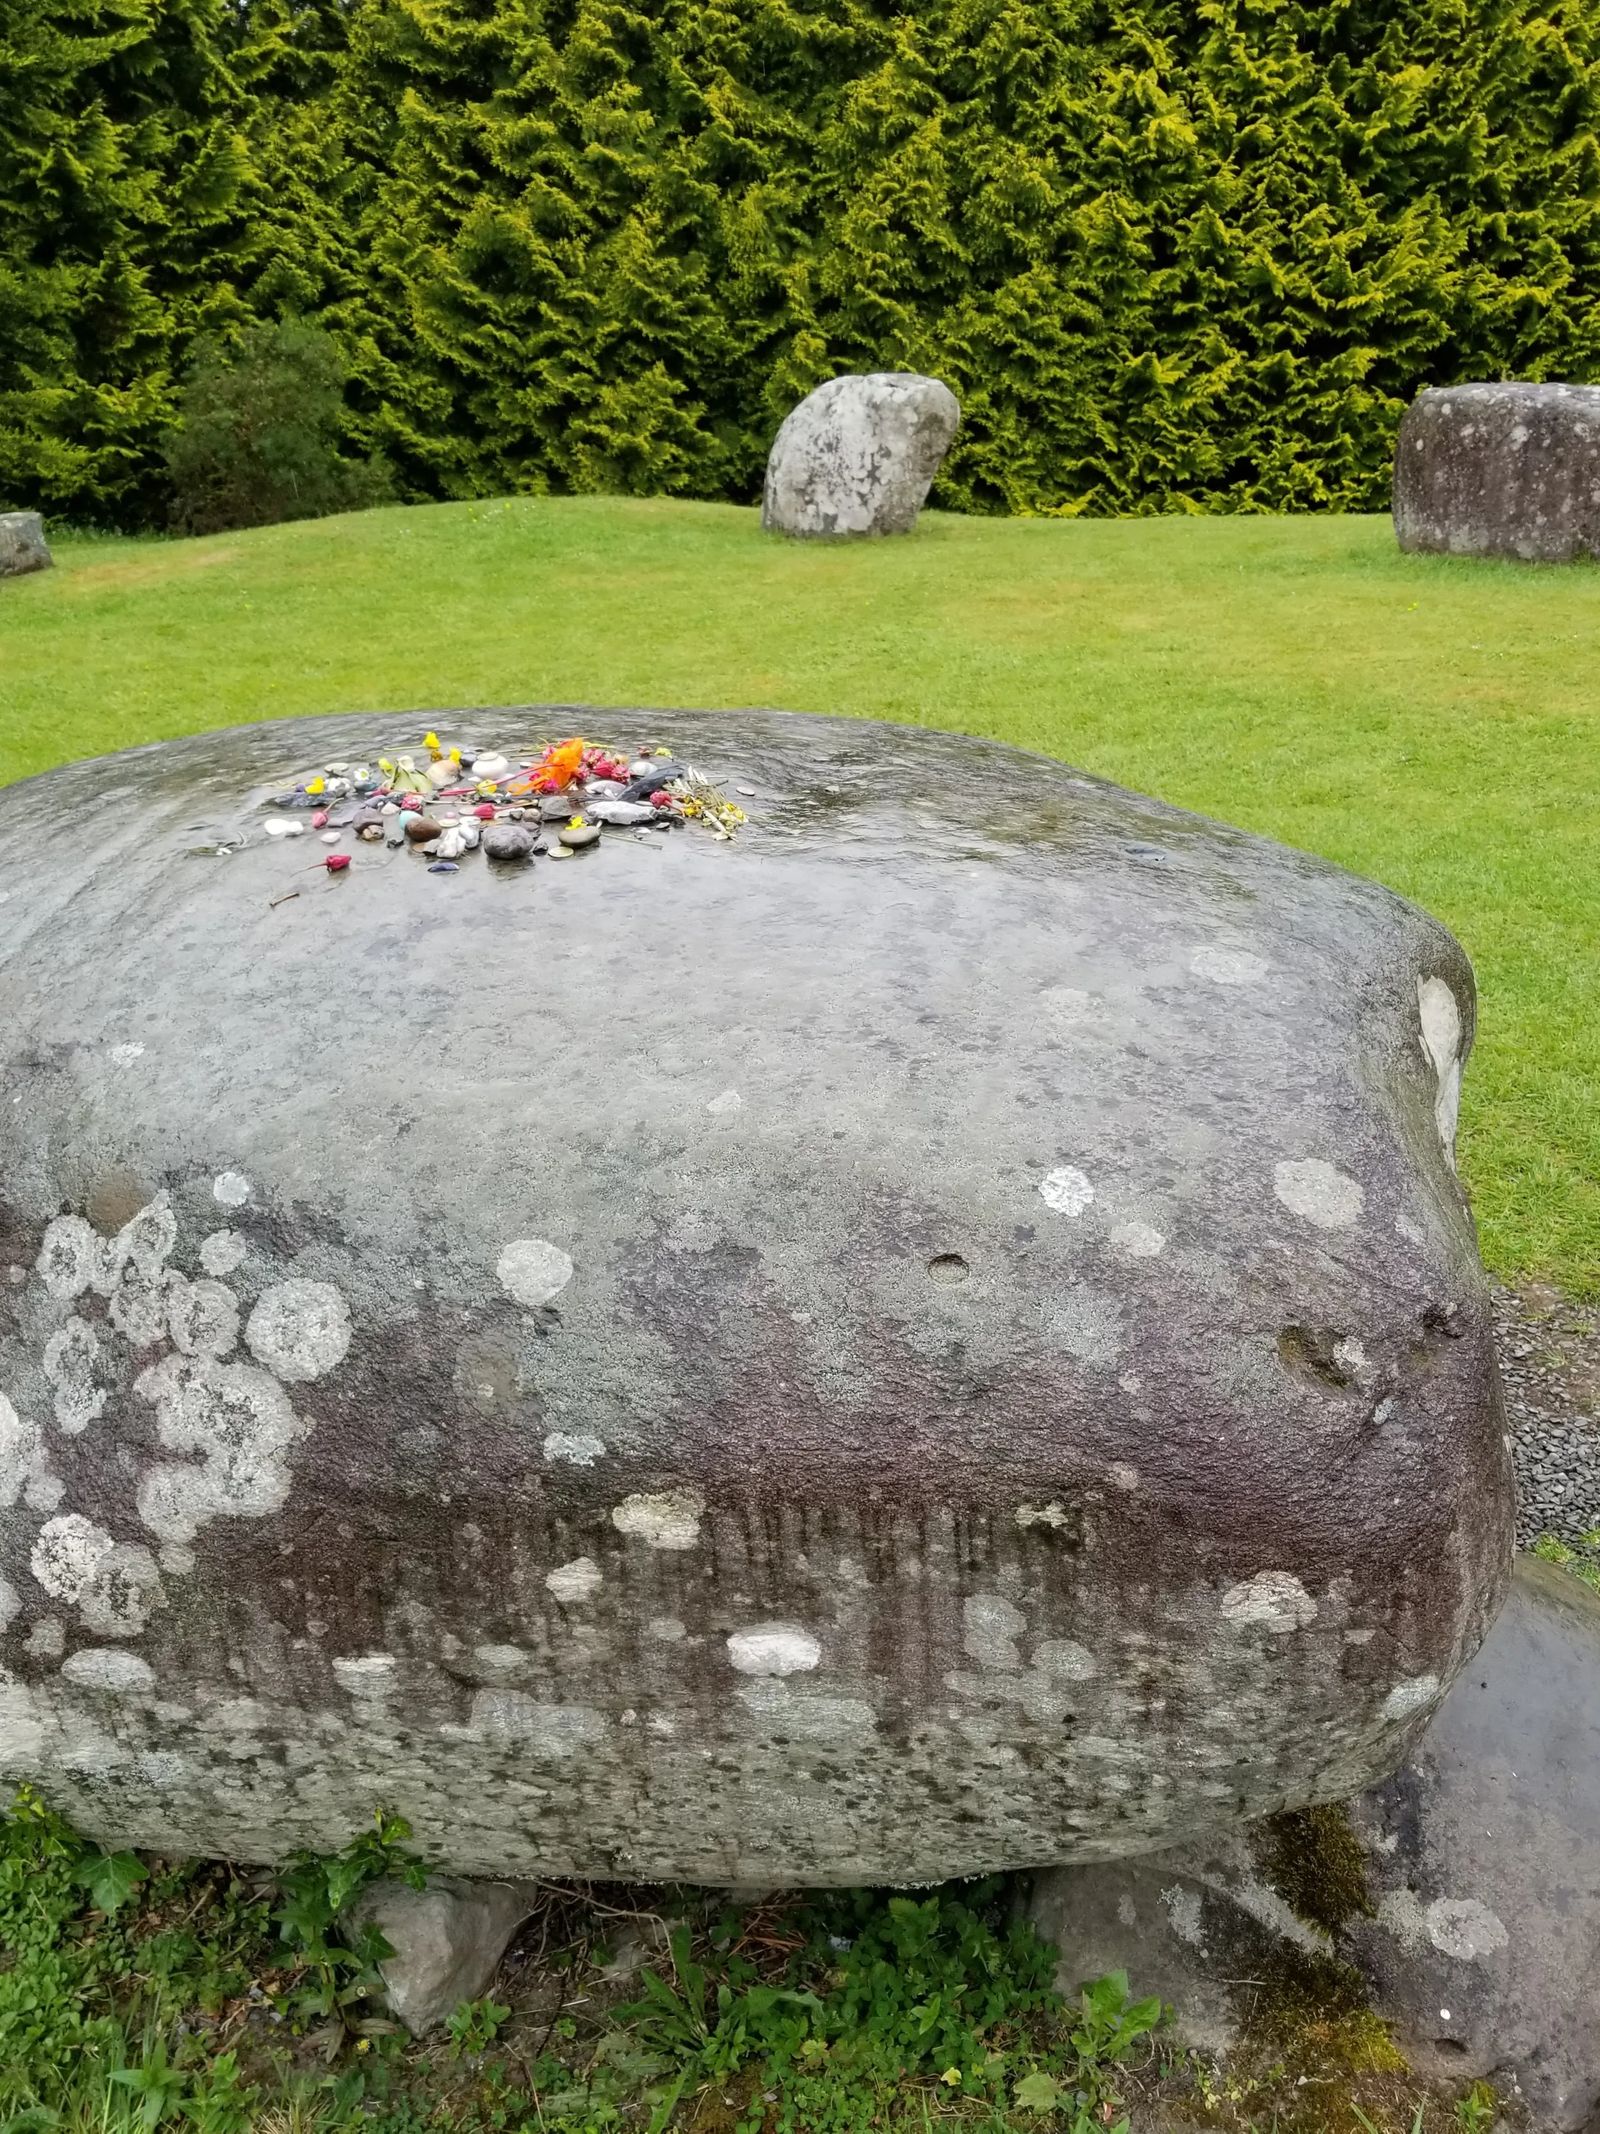 Photo of the central stone of the stone circle in Kenmare, Ireland.